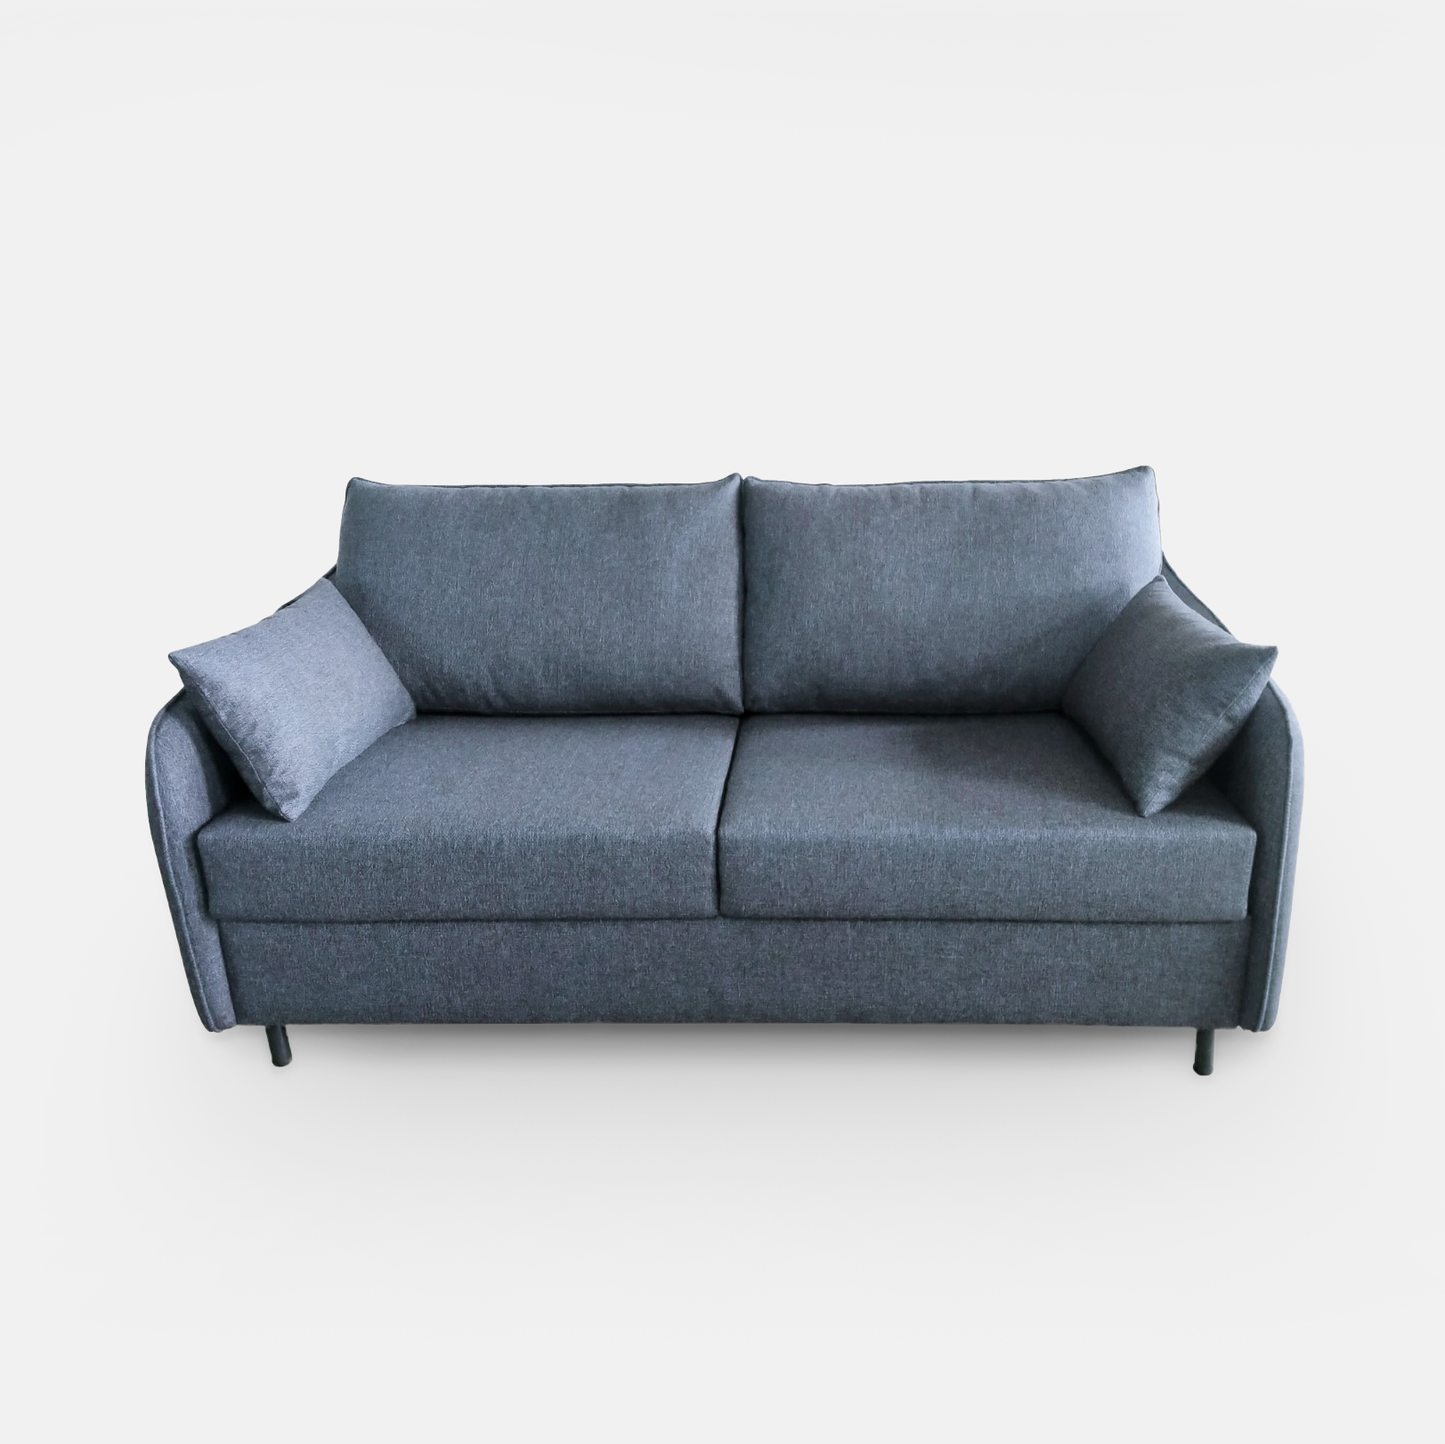 Sofabed Amsterdam Double